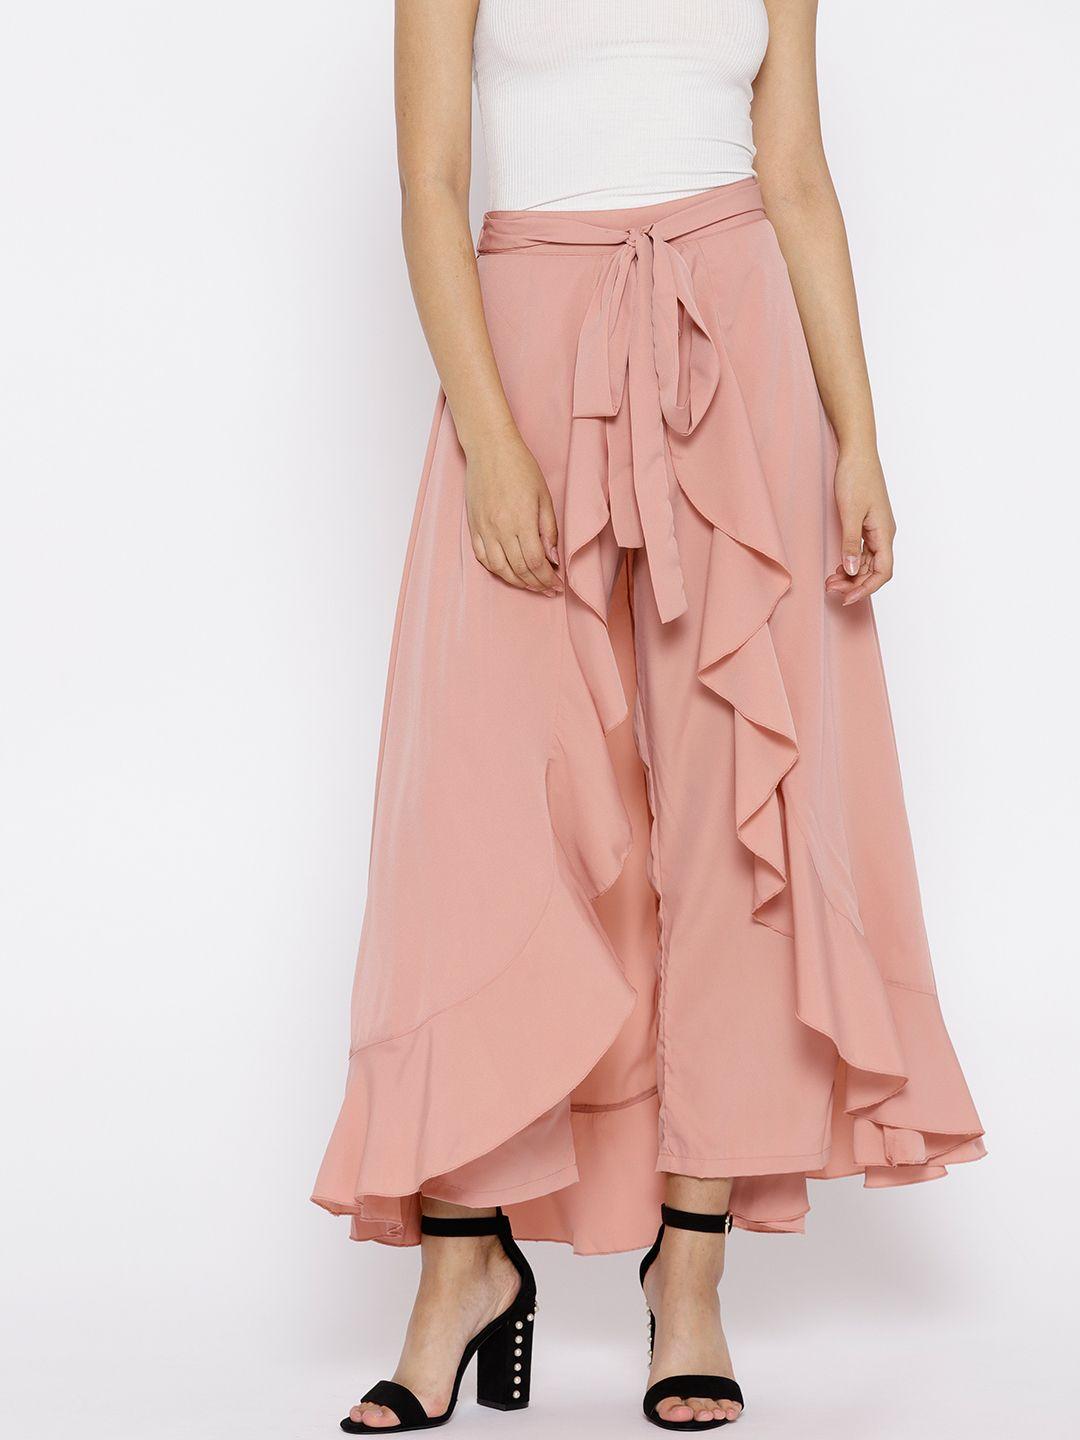 berrylush dusty pink solid ruffled maxi skirt with attached trousers